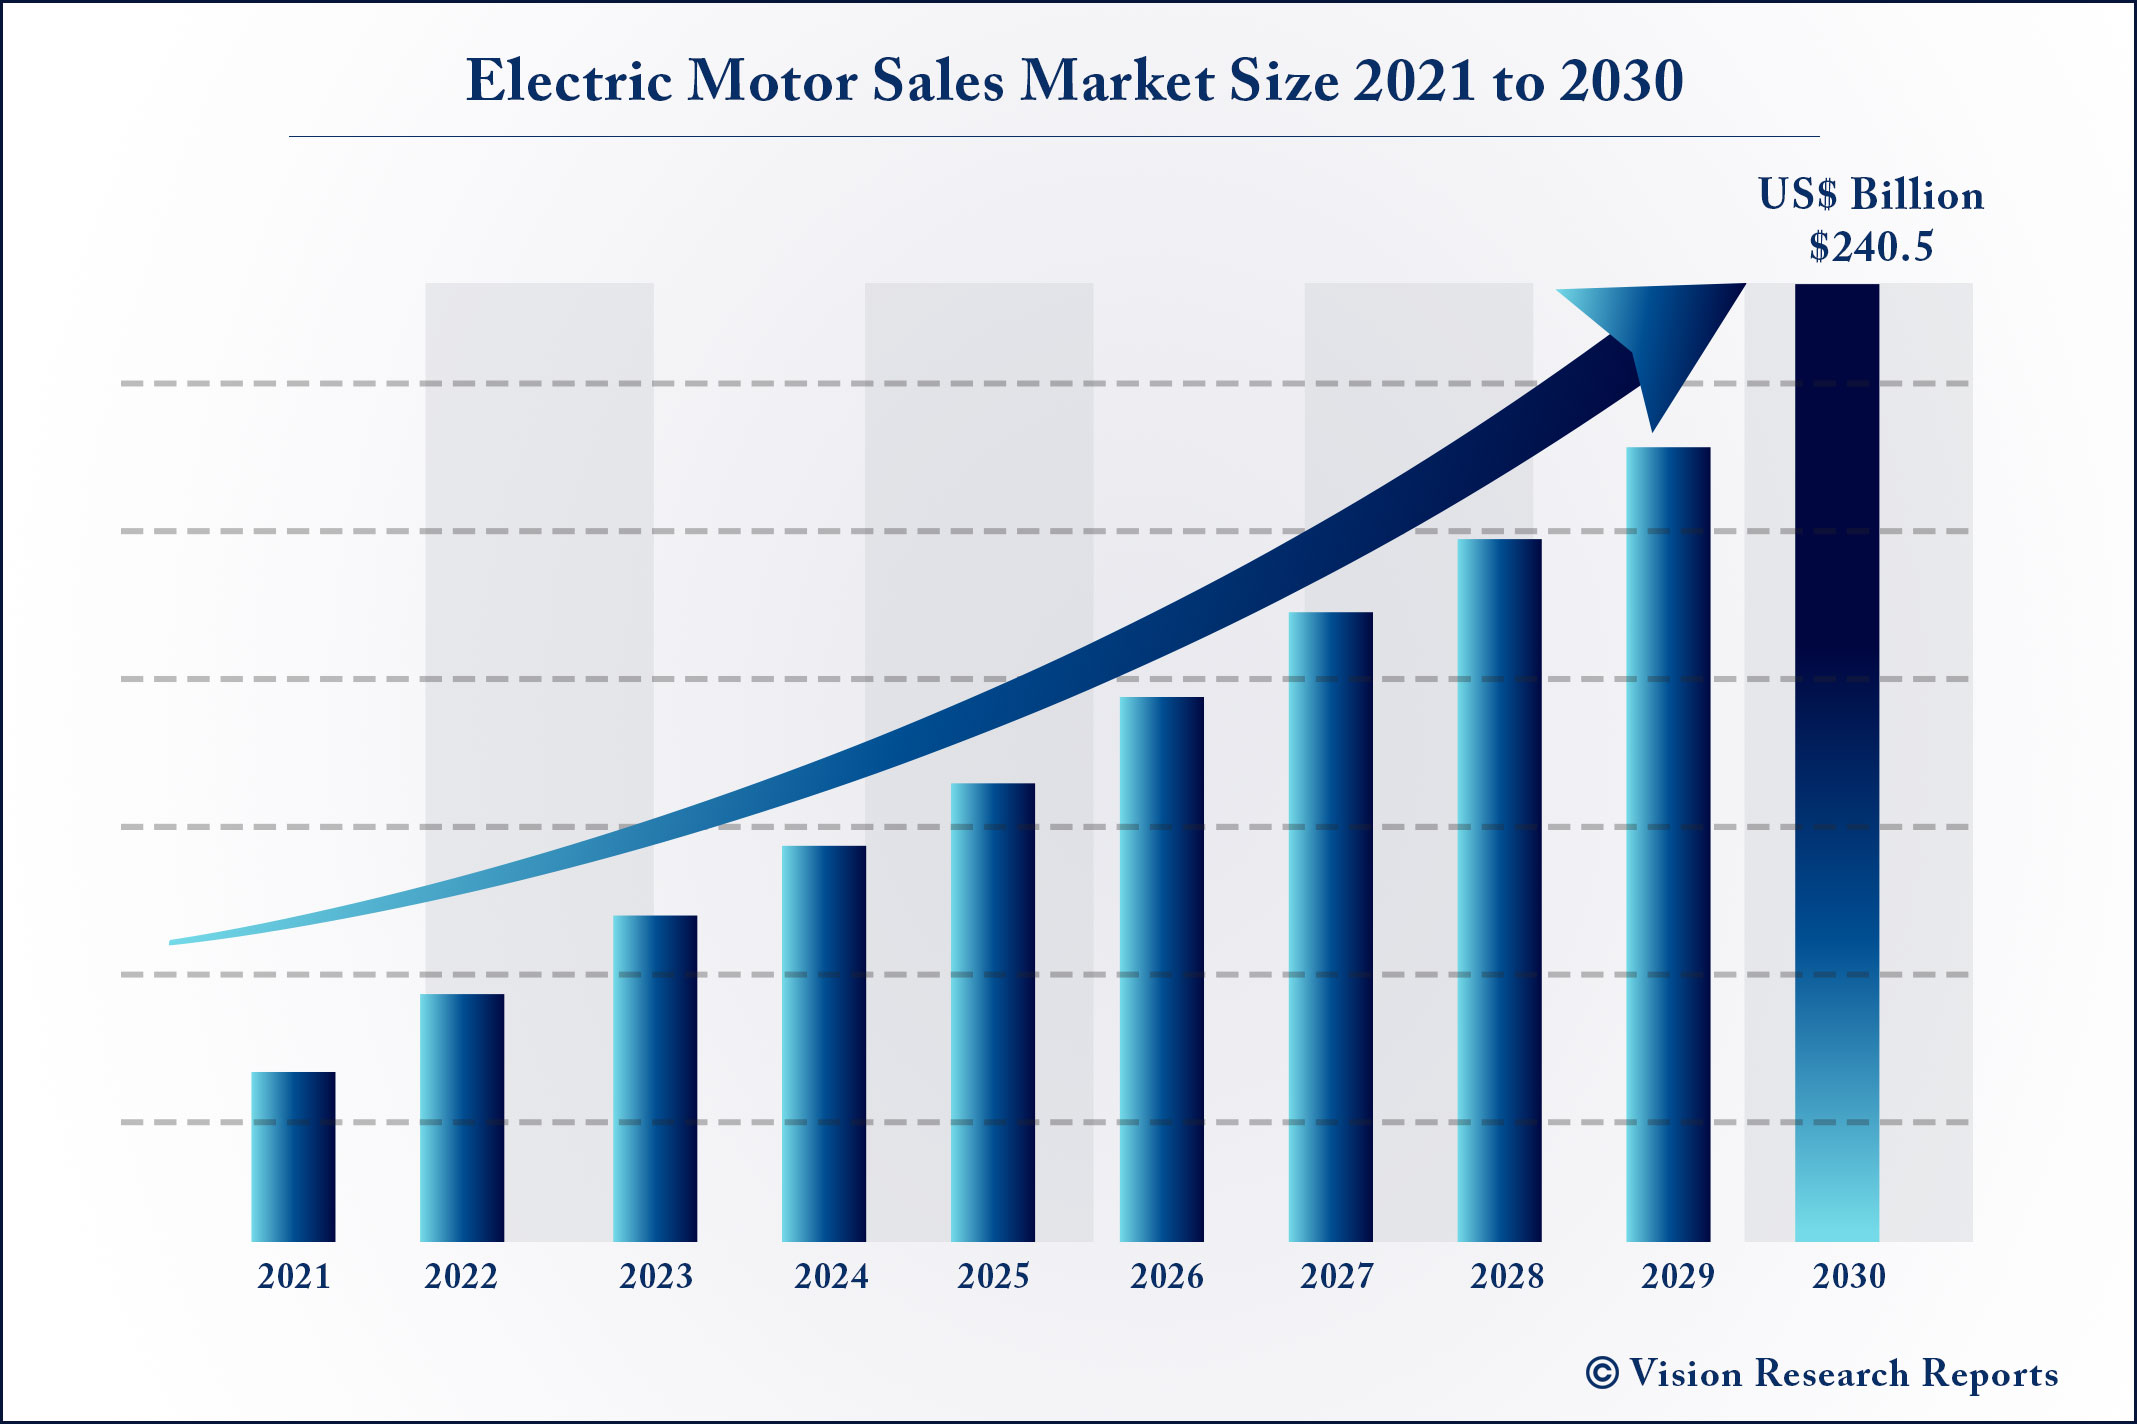 Electric Motor Sales Market Size 2021 to 2030